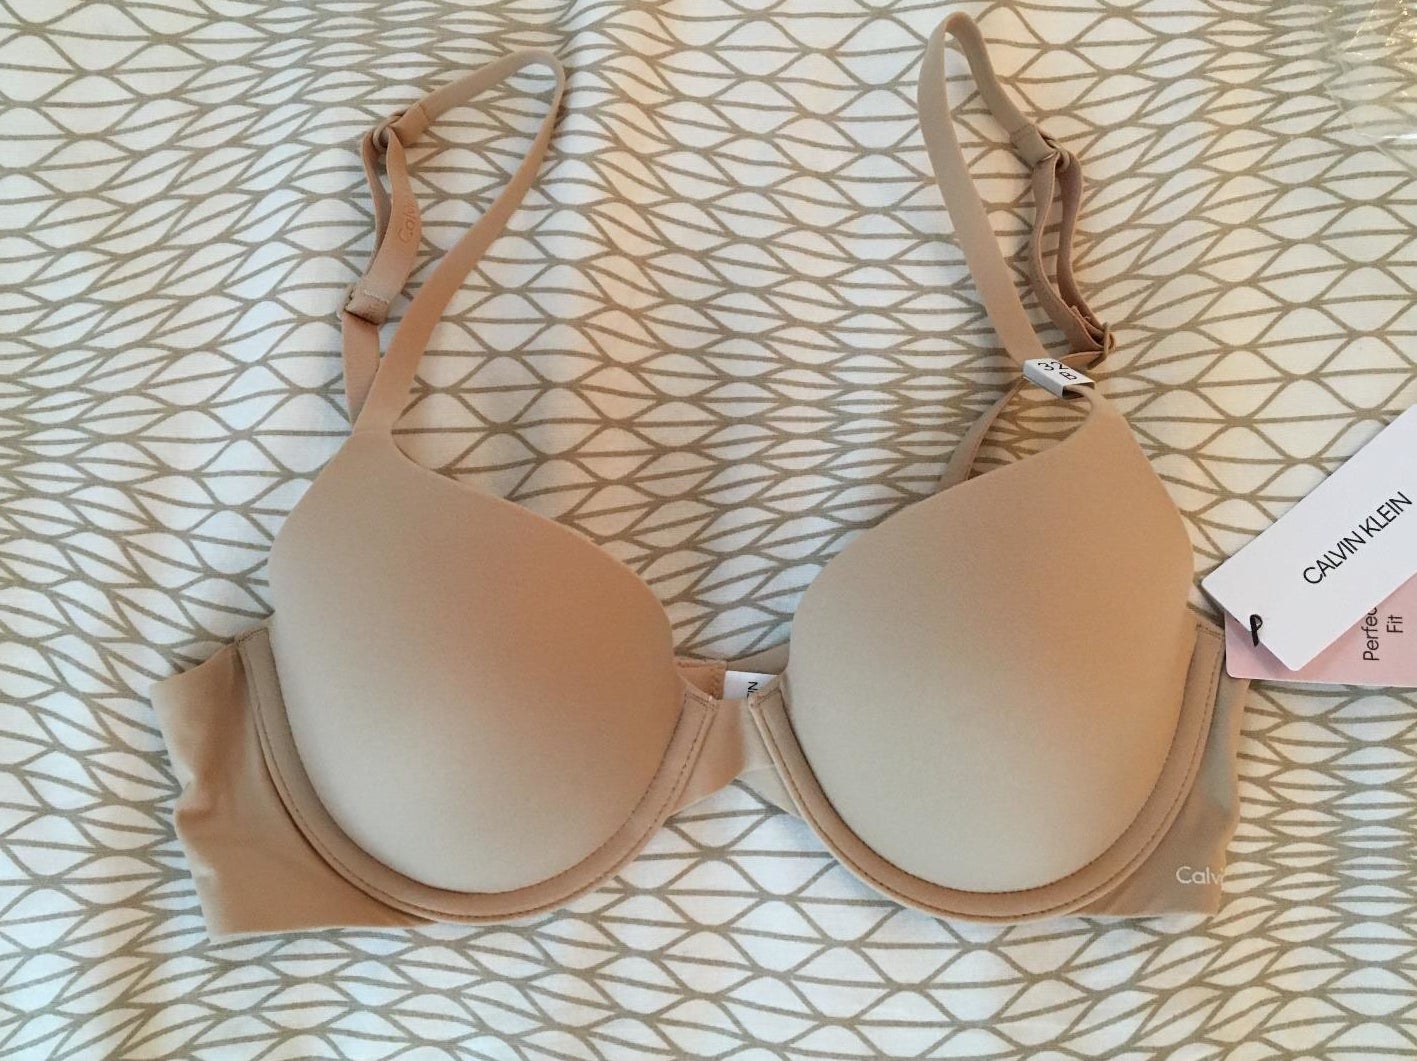 This is the PERFECT bra to wear under thin tops so you dont see lines